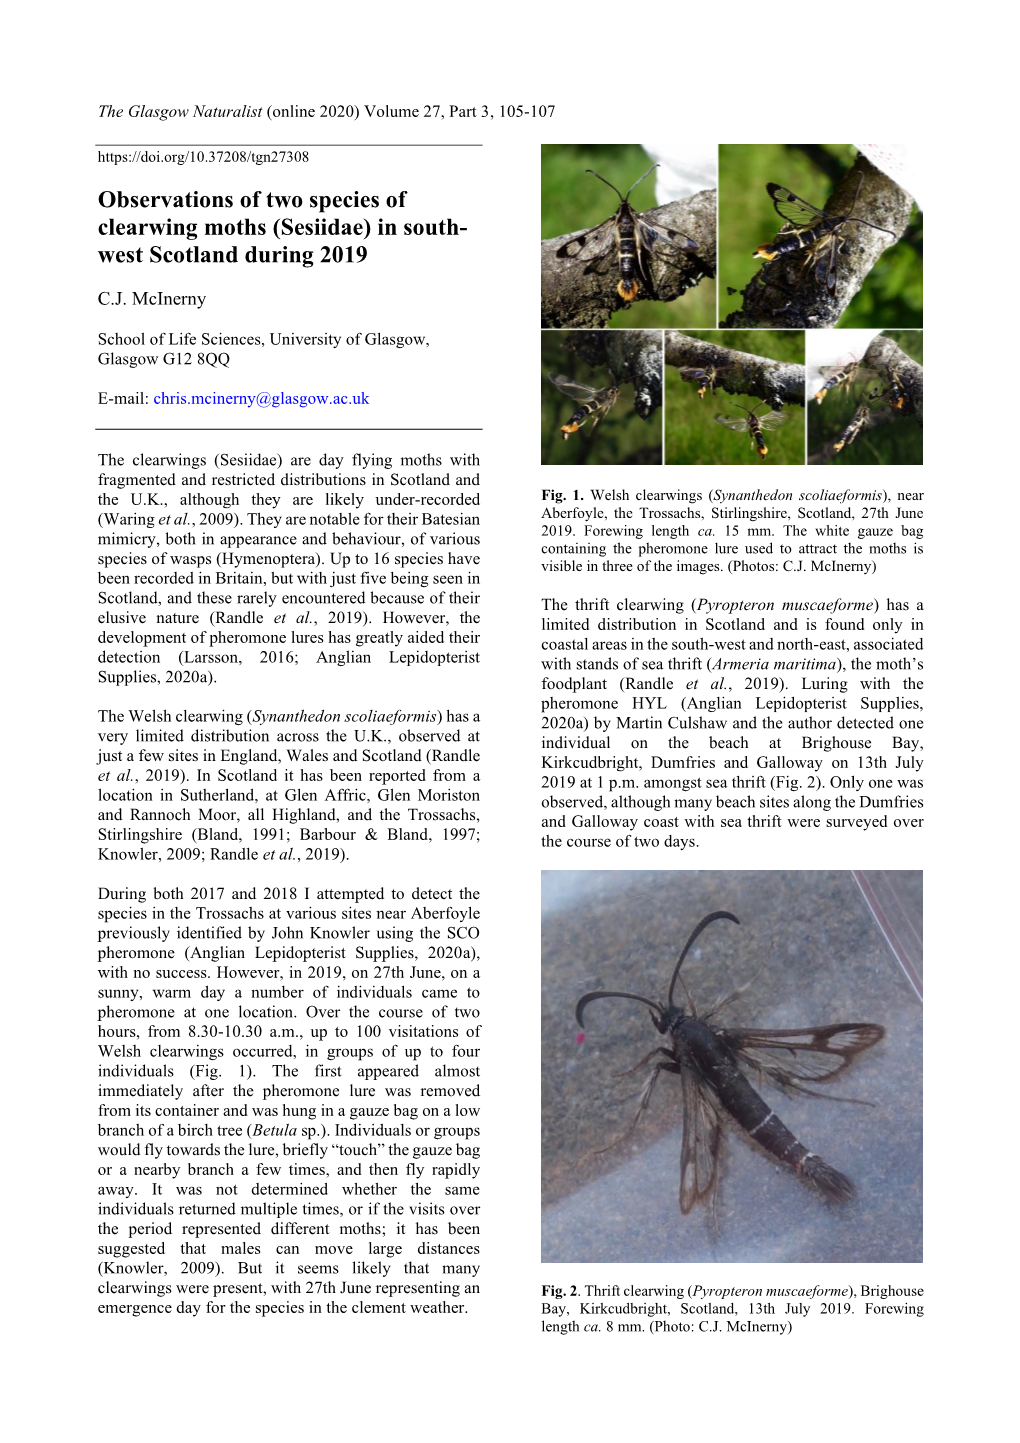 Observations of Two Species of Clearwing Moths (Sesiidae) in South- West Scotland During 2019